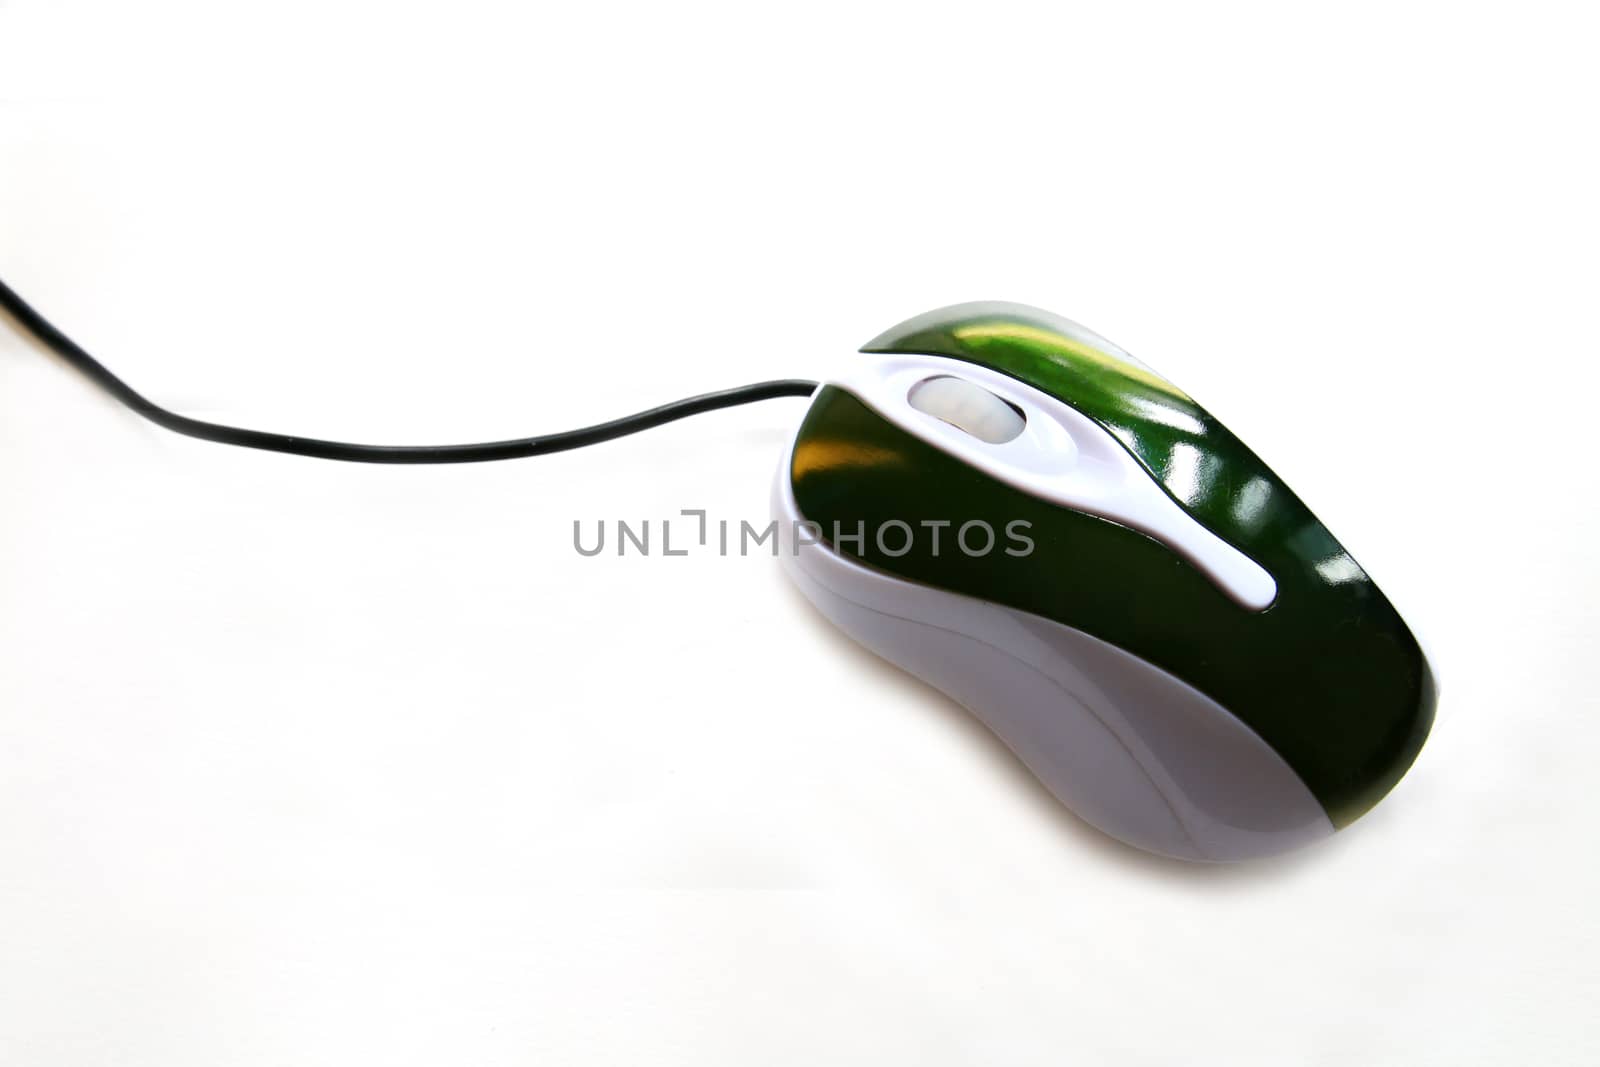 optical mouse for computer by kaidevil